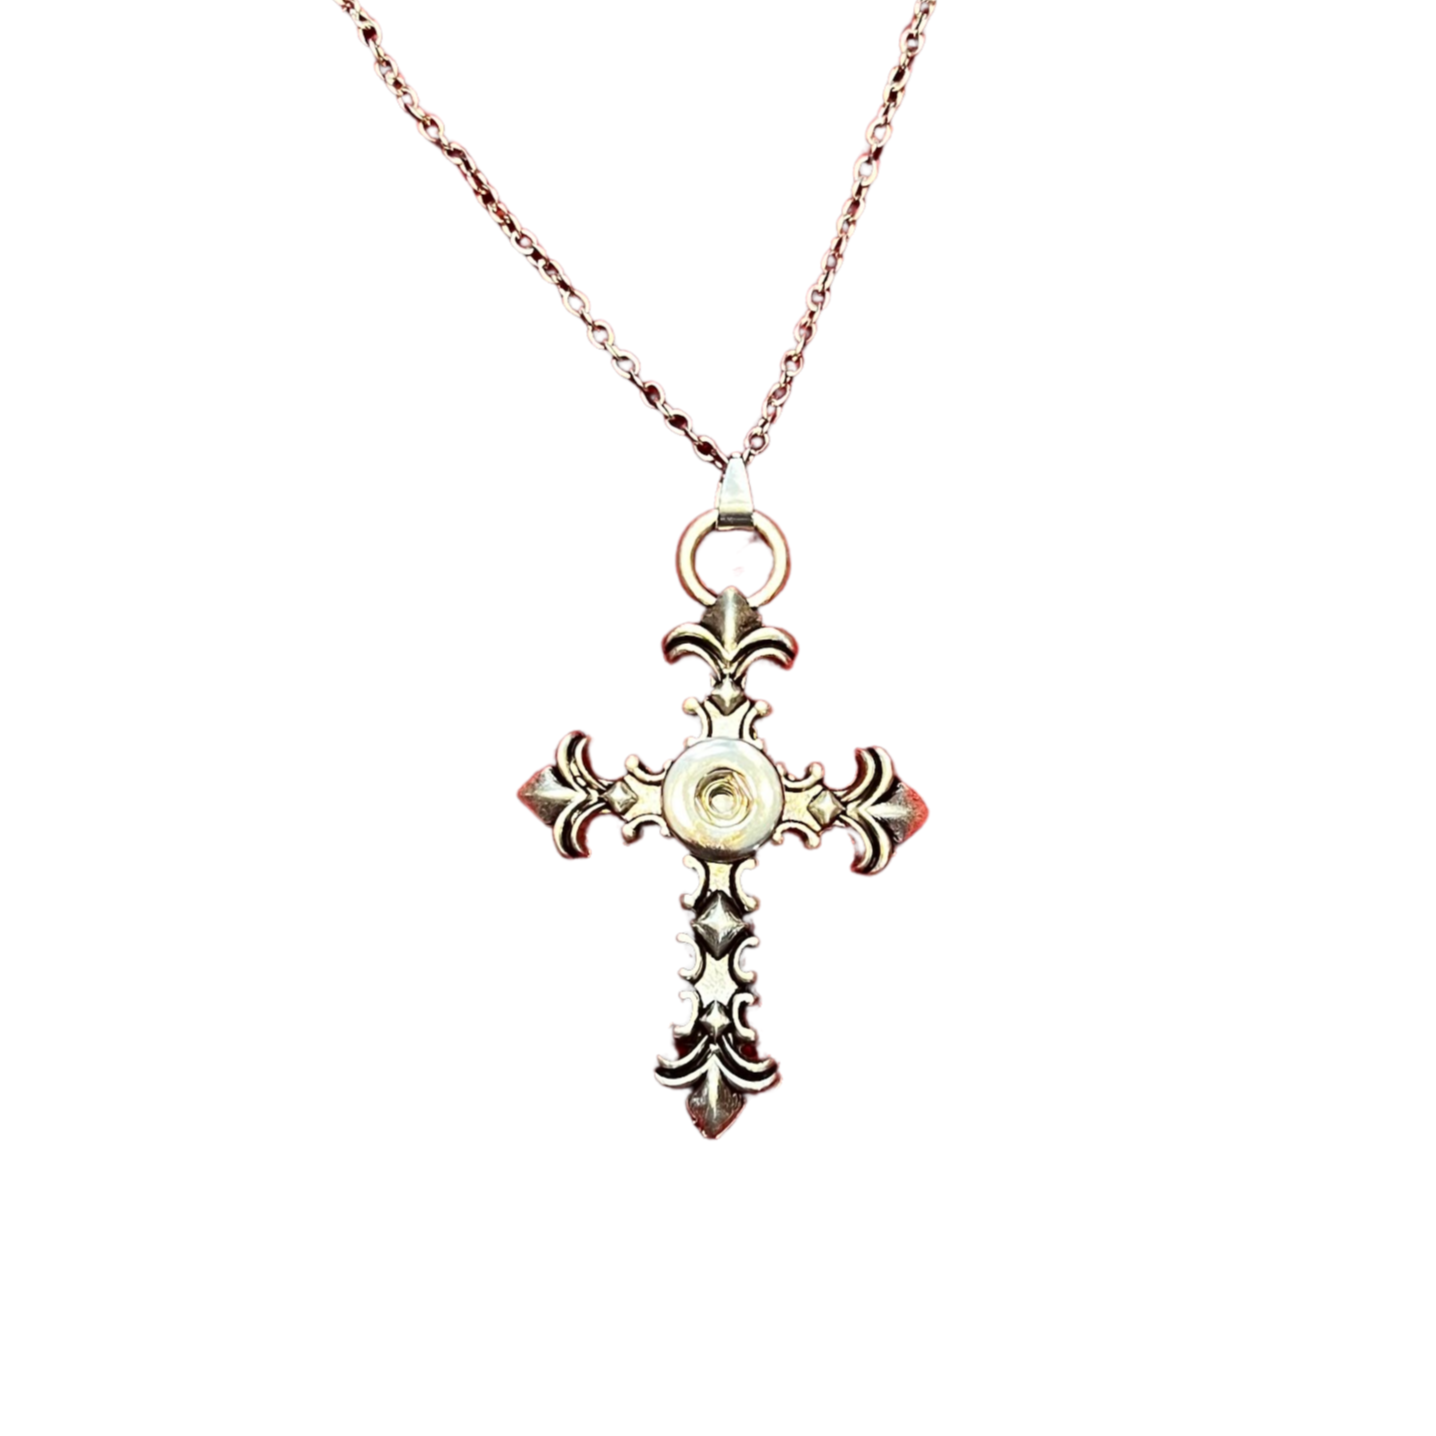 Antiqued Scallop Edge MINI 12mm Snap Cross Necklace with Chain